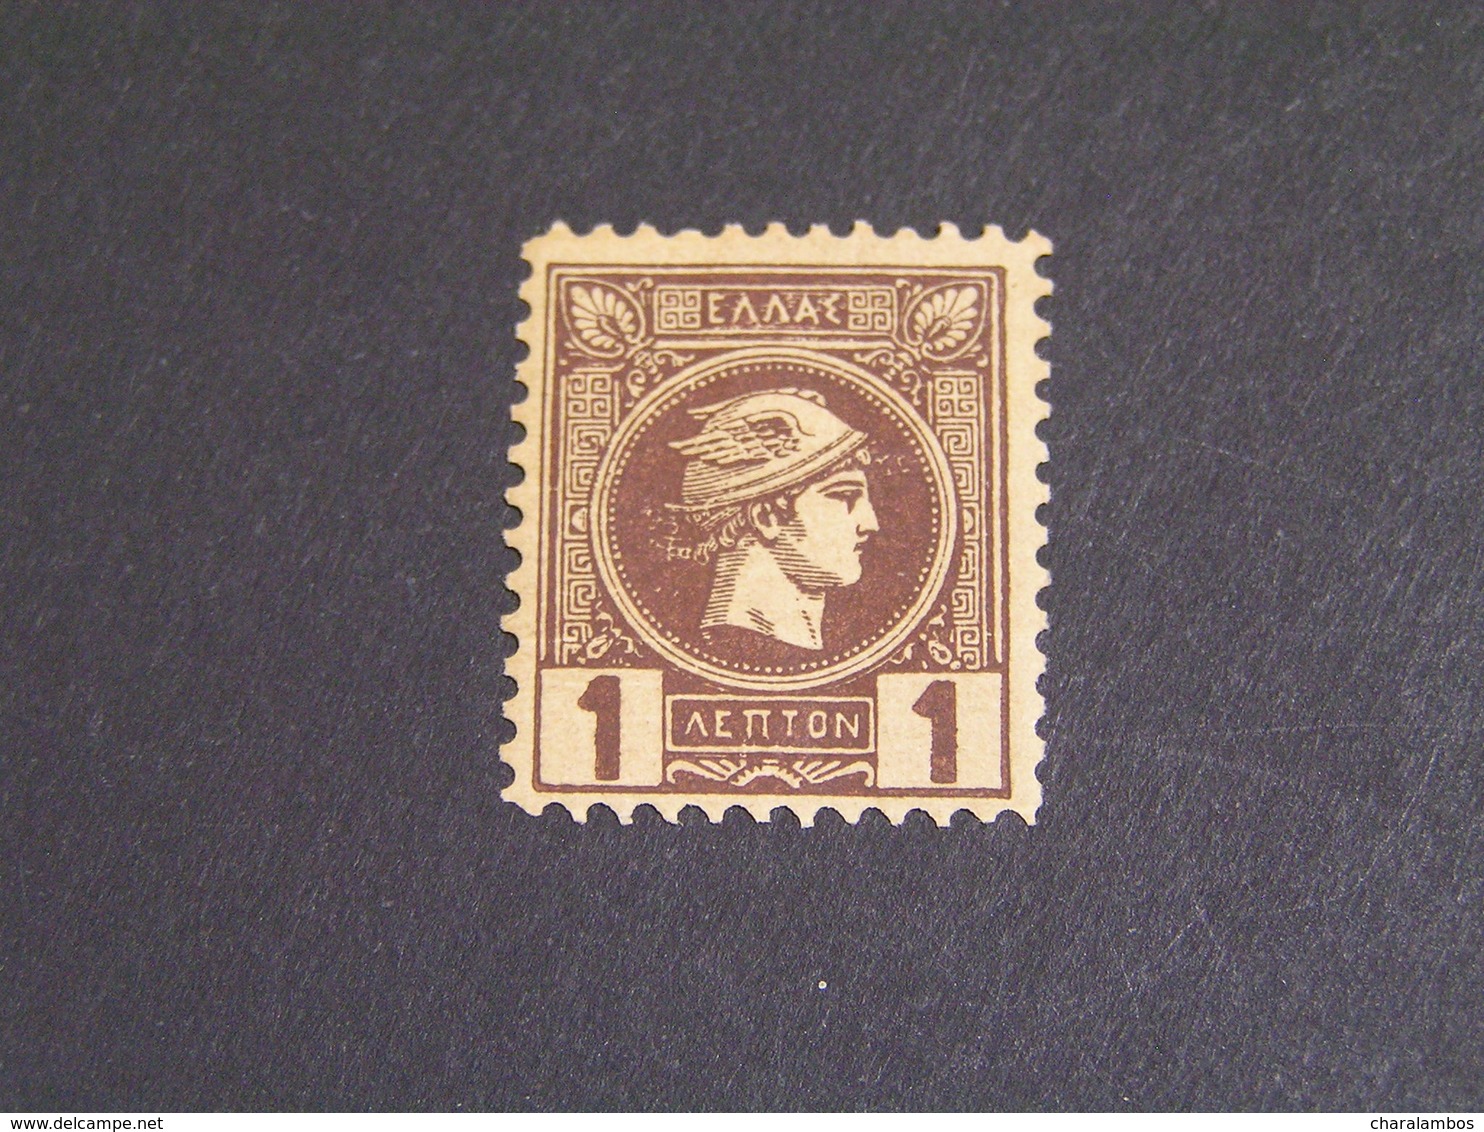 GREECE 1889-1890 Athens Printing-1st Period 1λ Perforation 11 1/2 MLH. - Unused Stamps